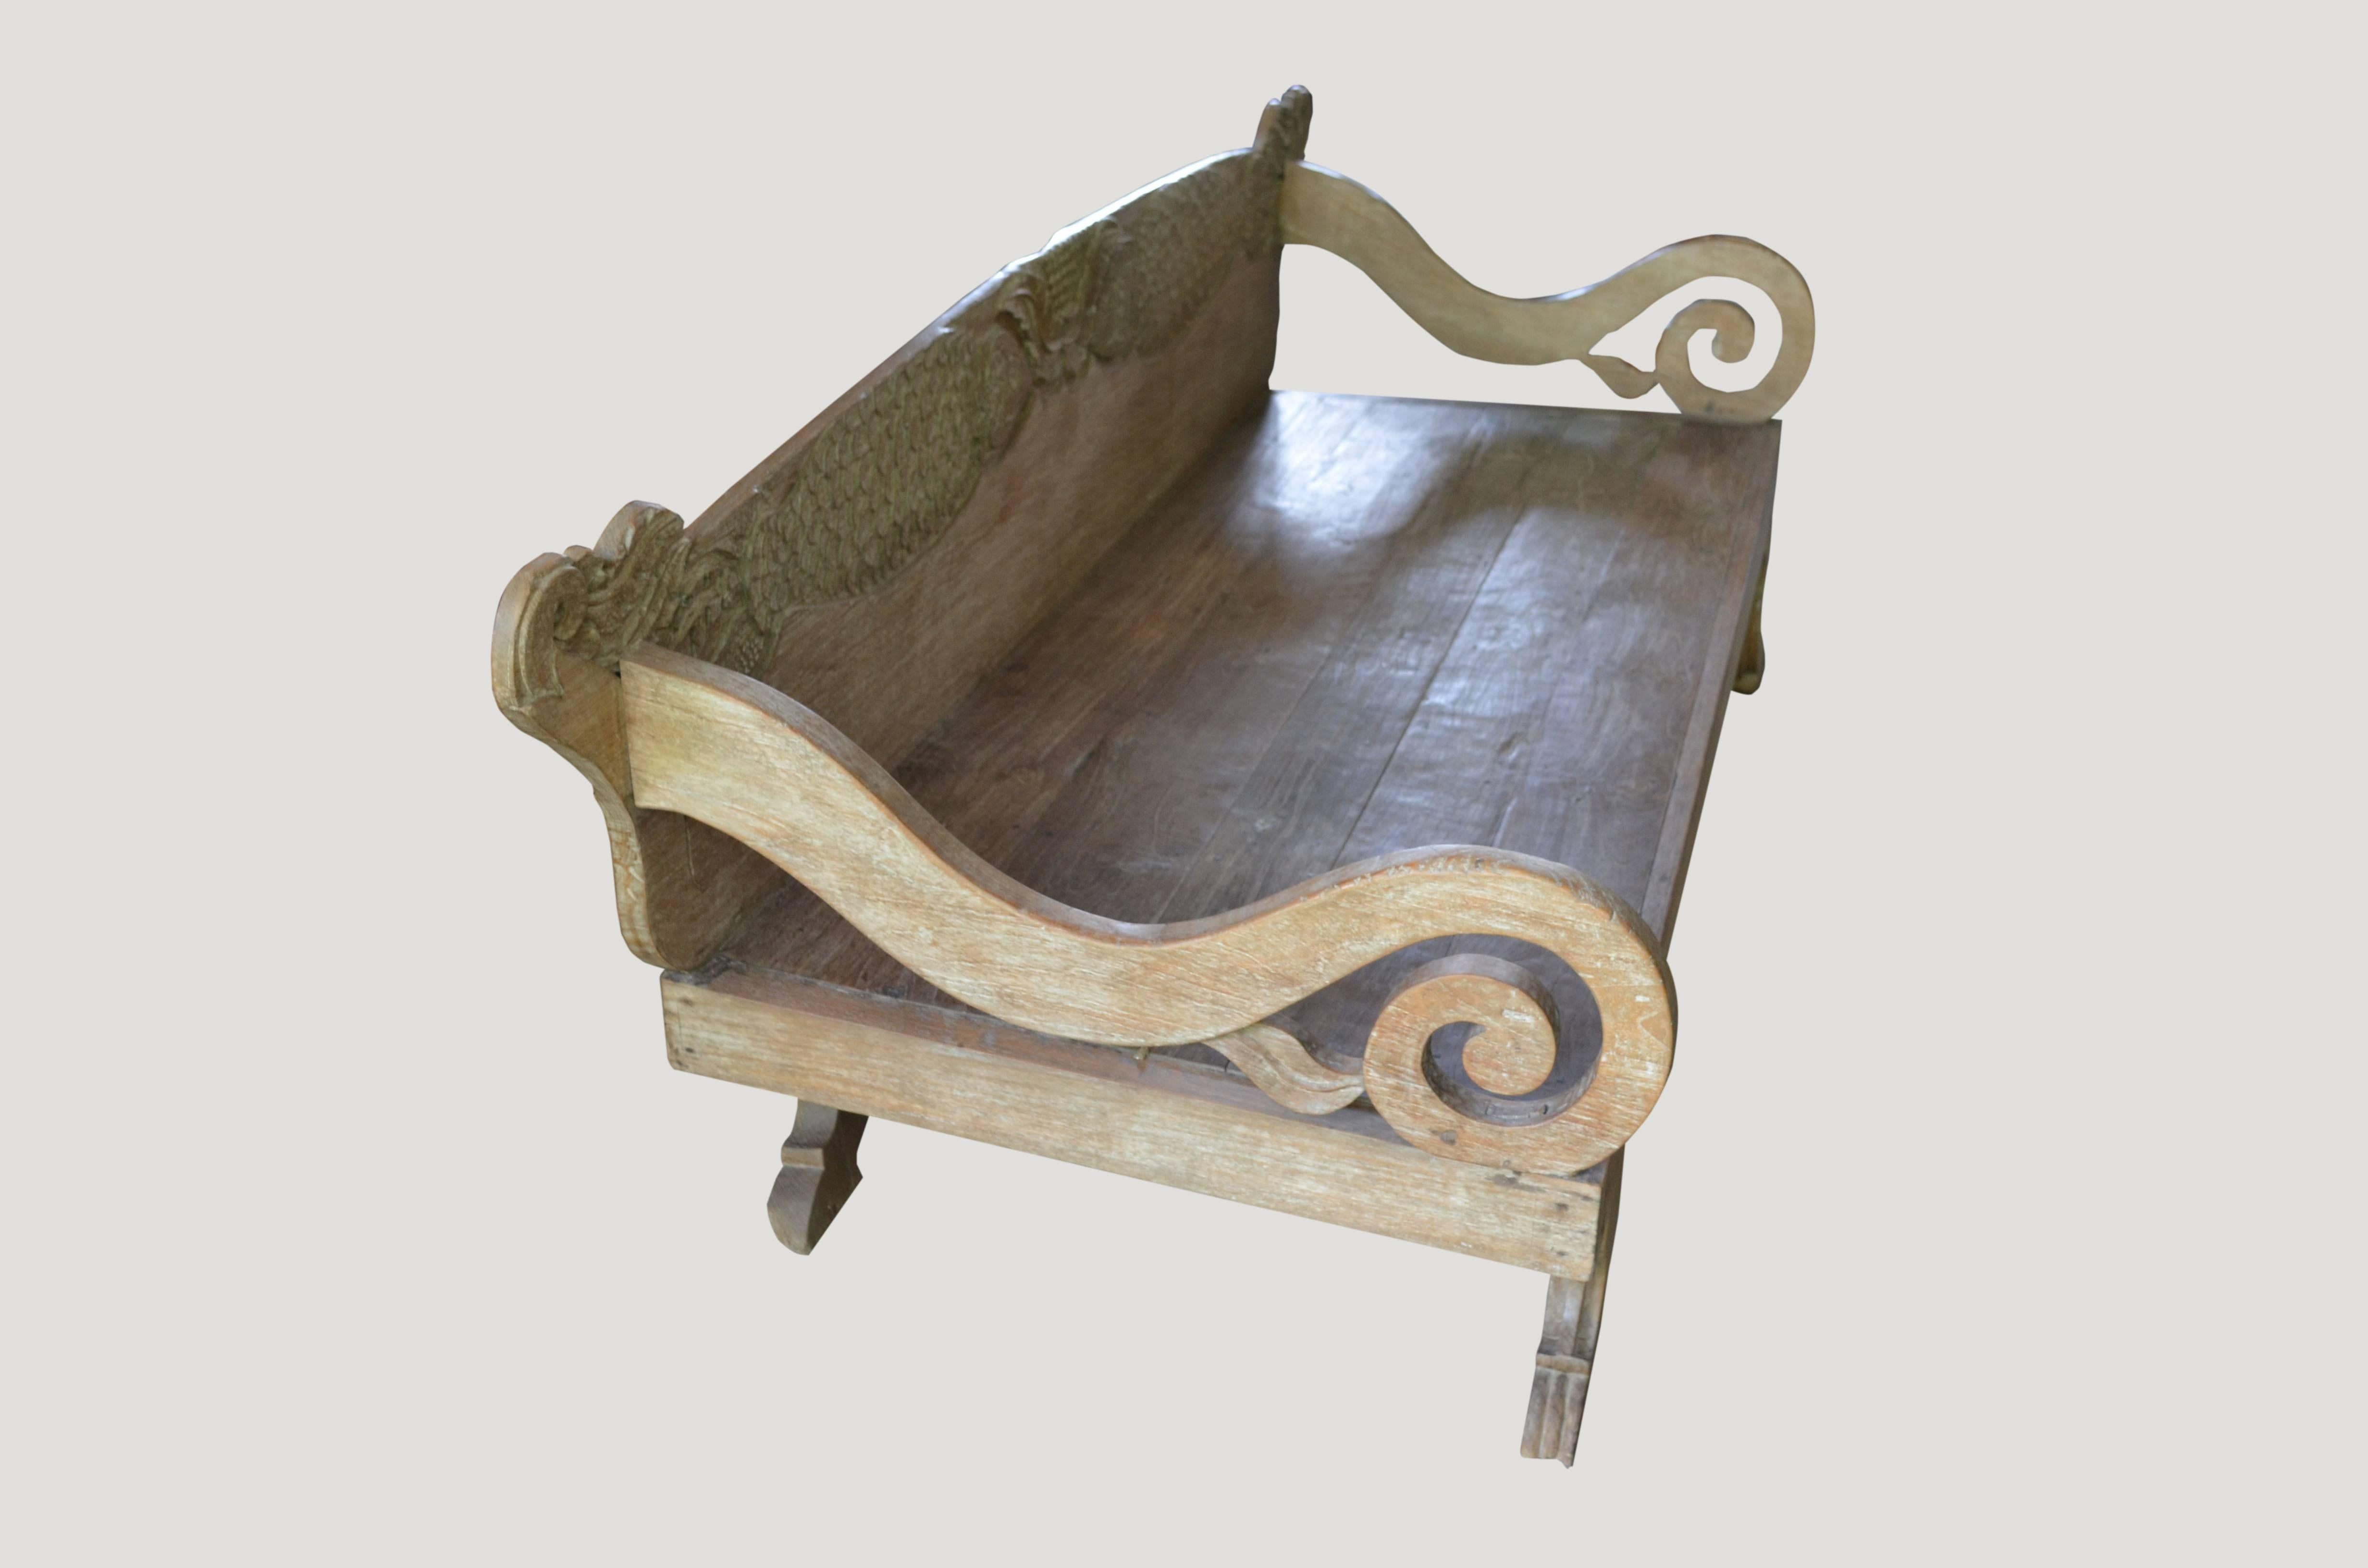 Rare Andrianna Shamaris teak wood daybed with hand-carved fish motif backrest and beautiful hand-carved legs. For the Primitive collector. This teak wood daybed comes with a white cotton mattress. Perfect for inside or outside relaxation.

This